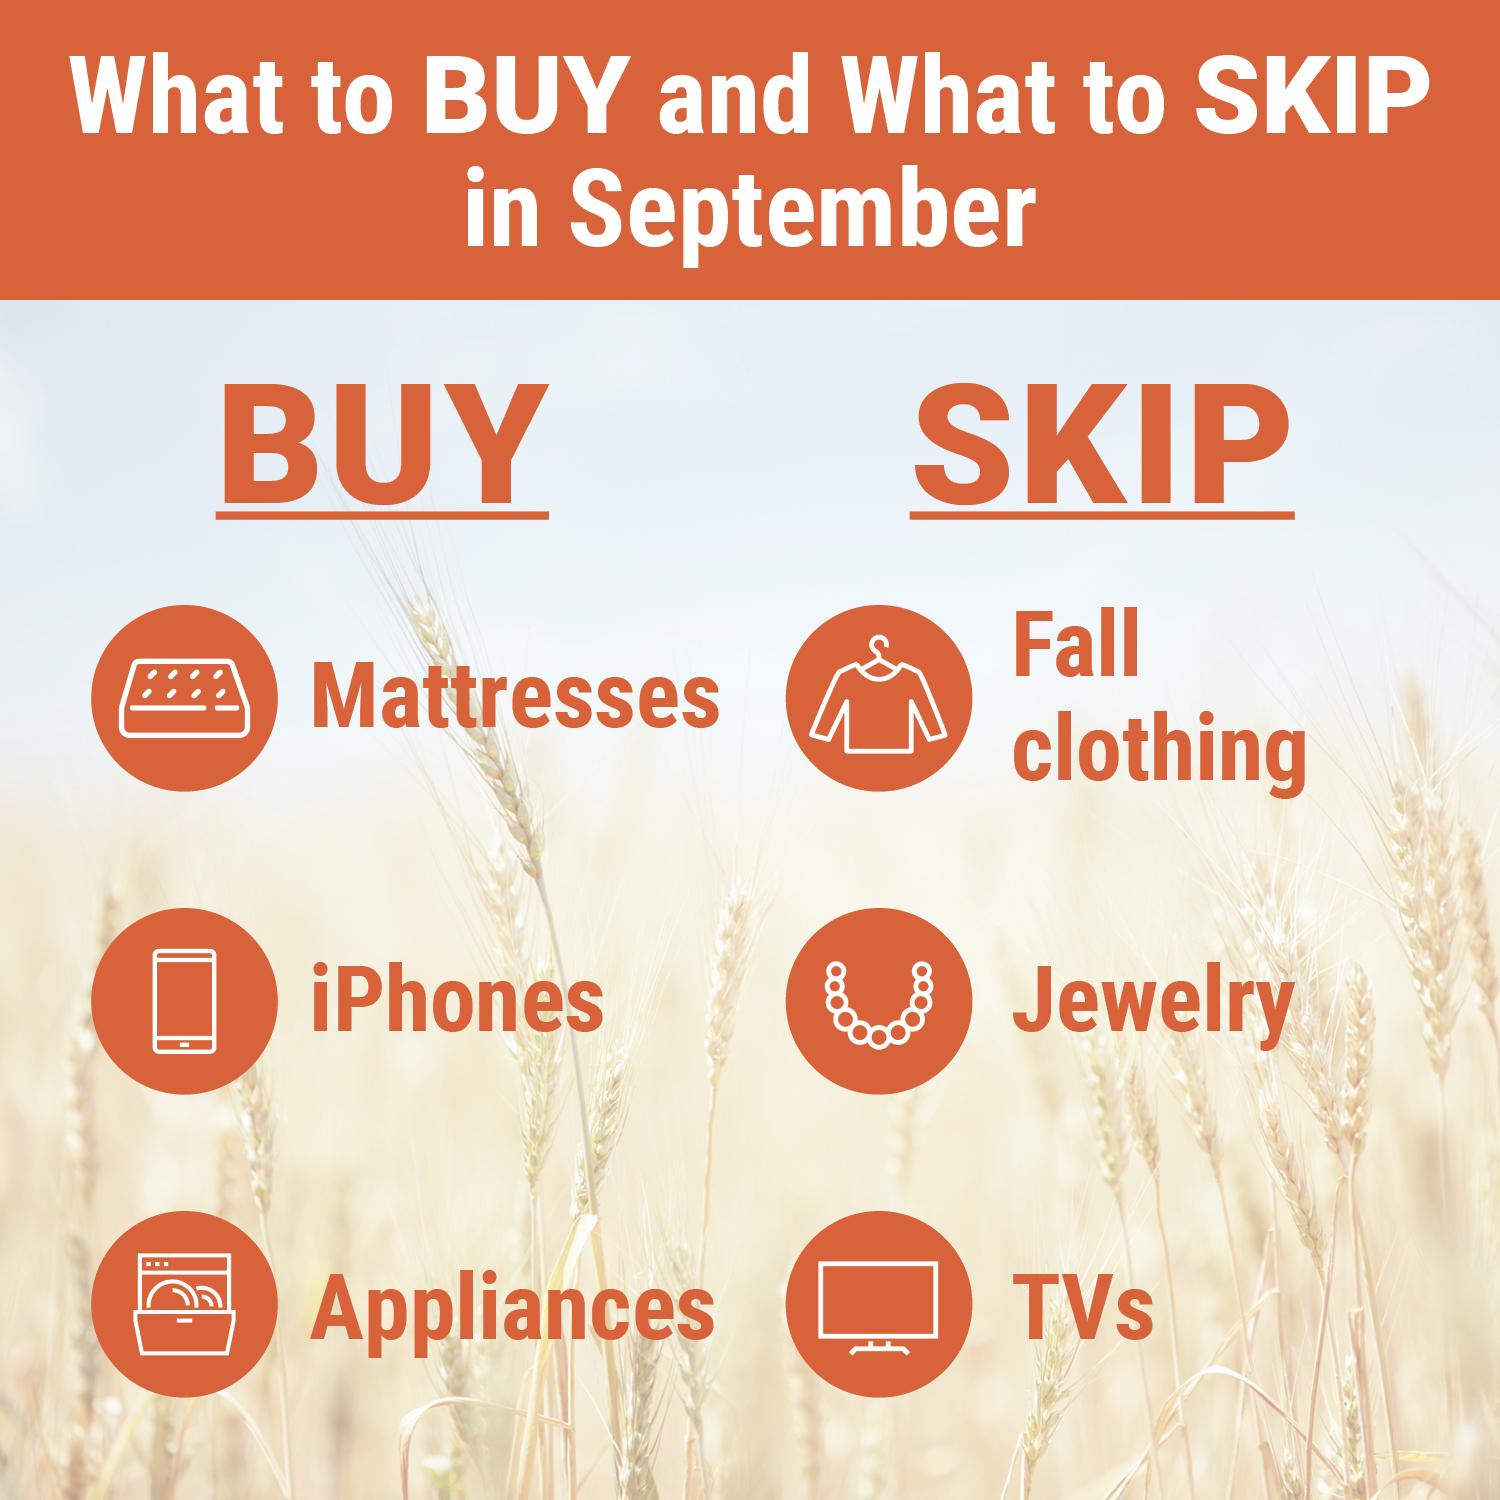 What to buy and skip in August